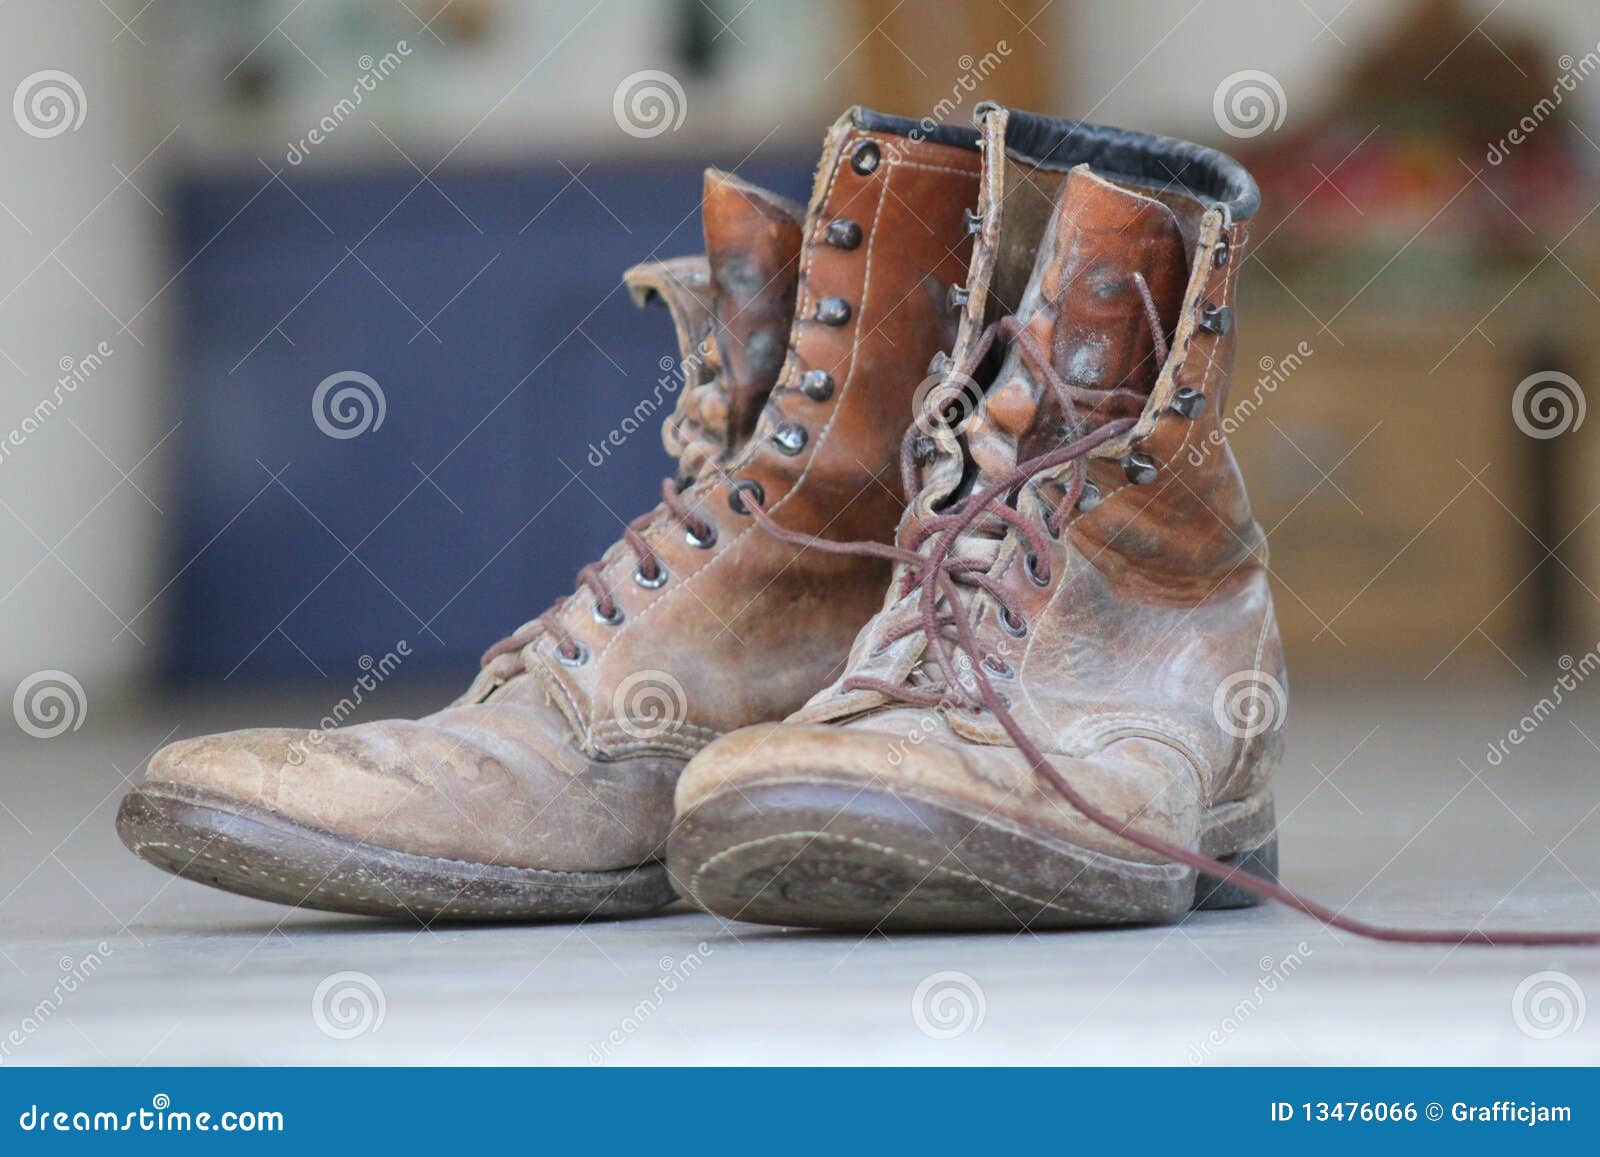 Work Boots stock photo. Image of boots, army, foot, work - 13476066